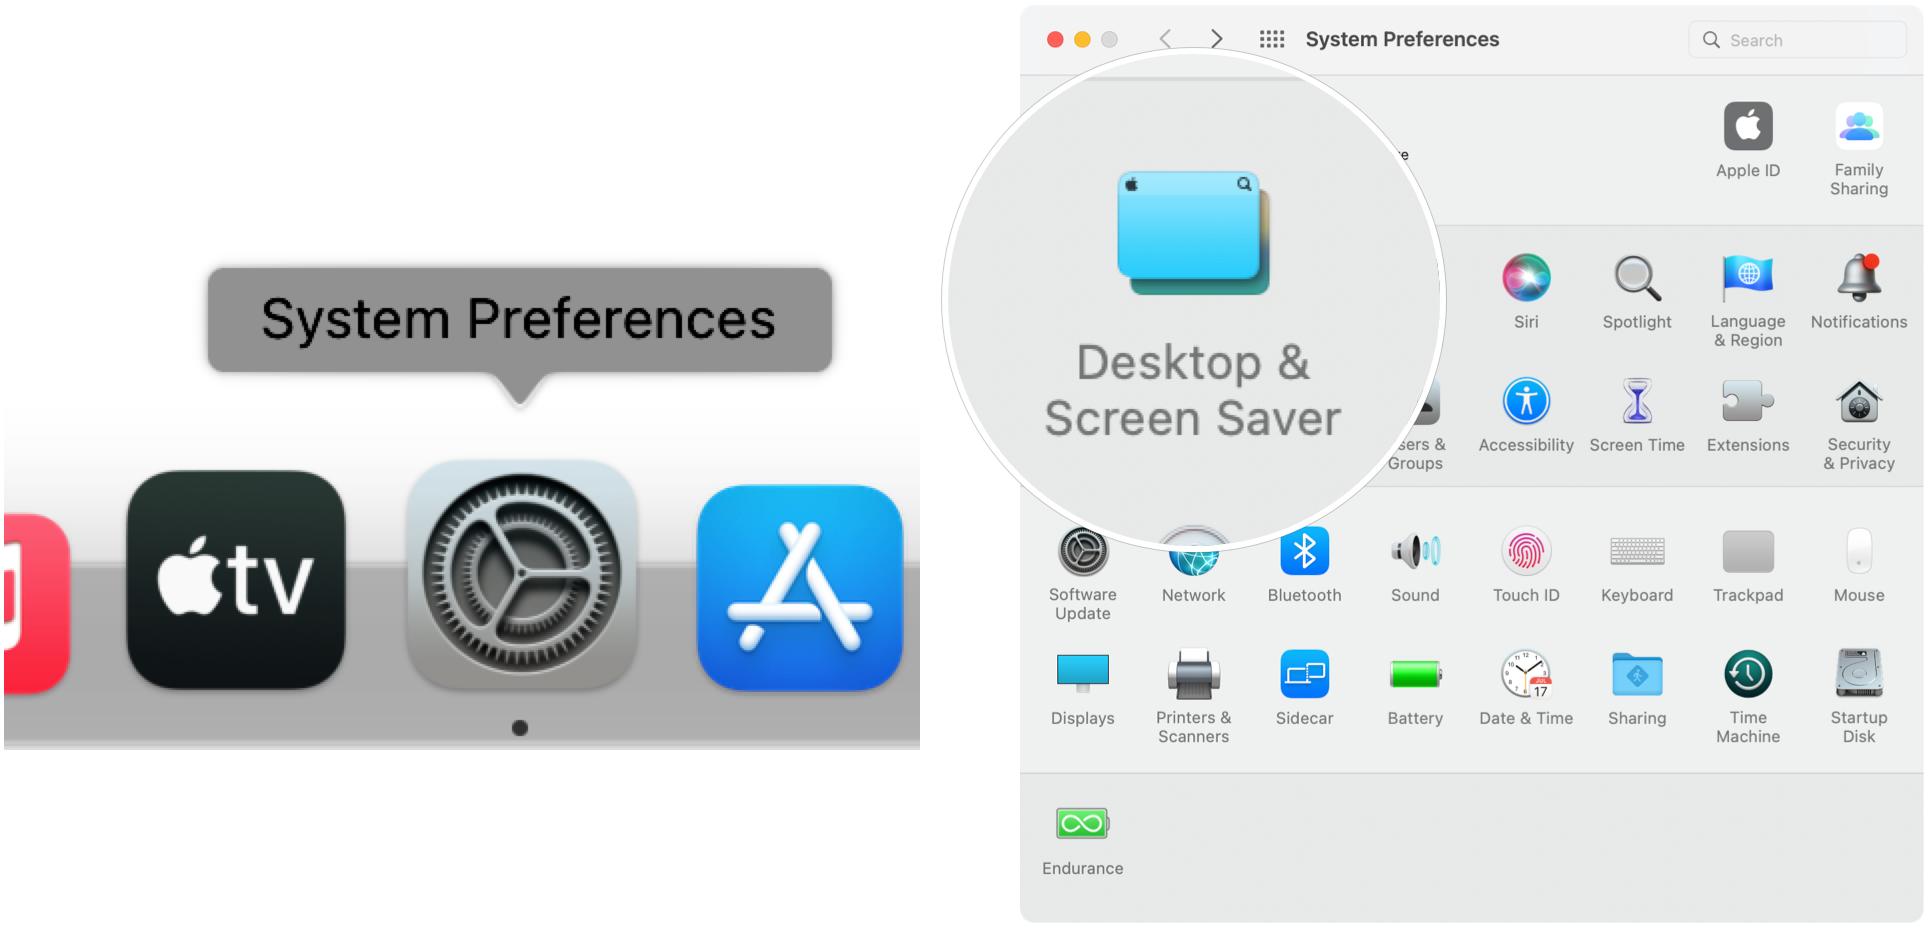 To bring up Quick Note from Hot Corners, choose System Preferences, then select Desktop & Screen Saver.